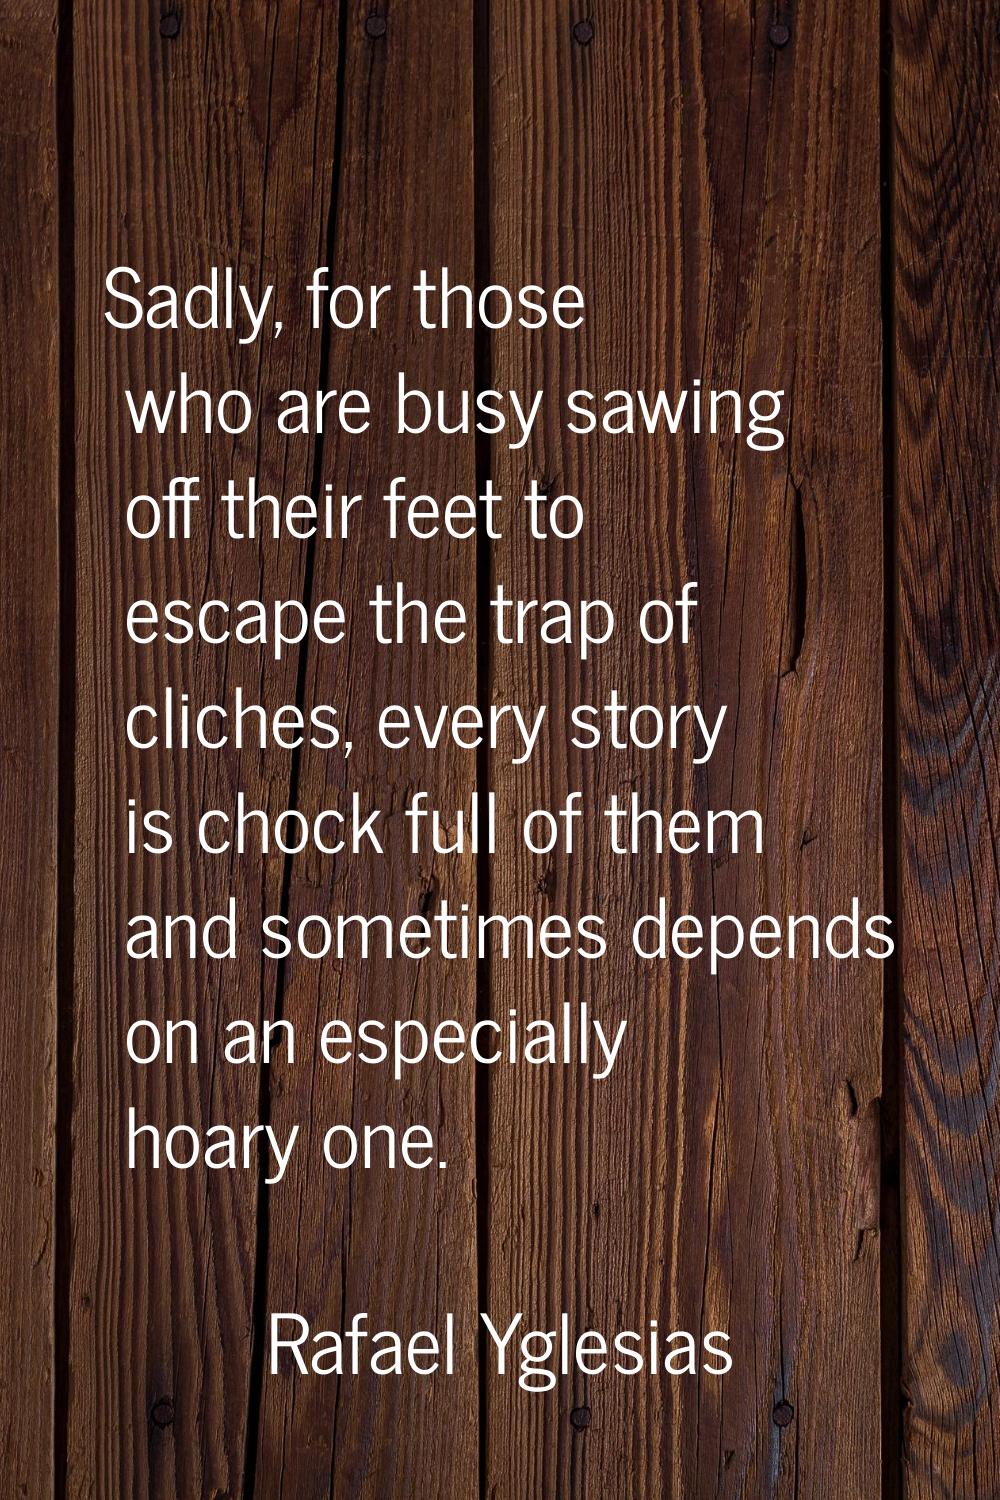 Sadly, for those who are busy sawing off their feet to escape the trap of cliches, every story is c